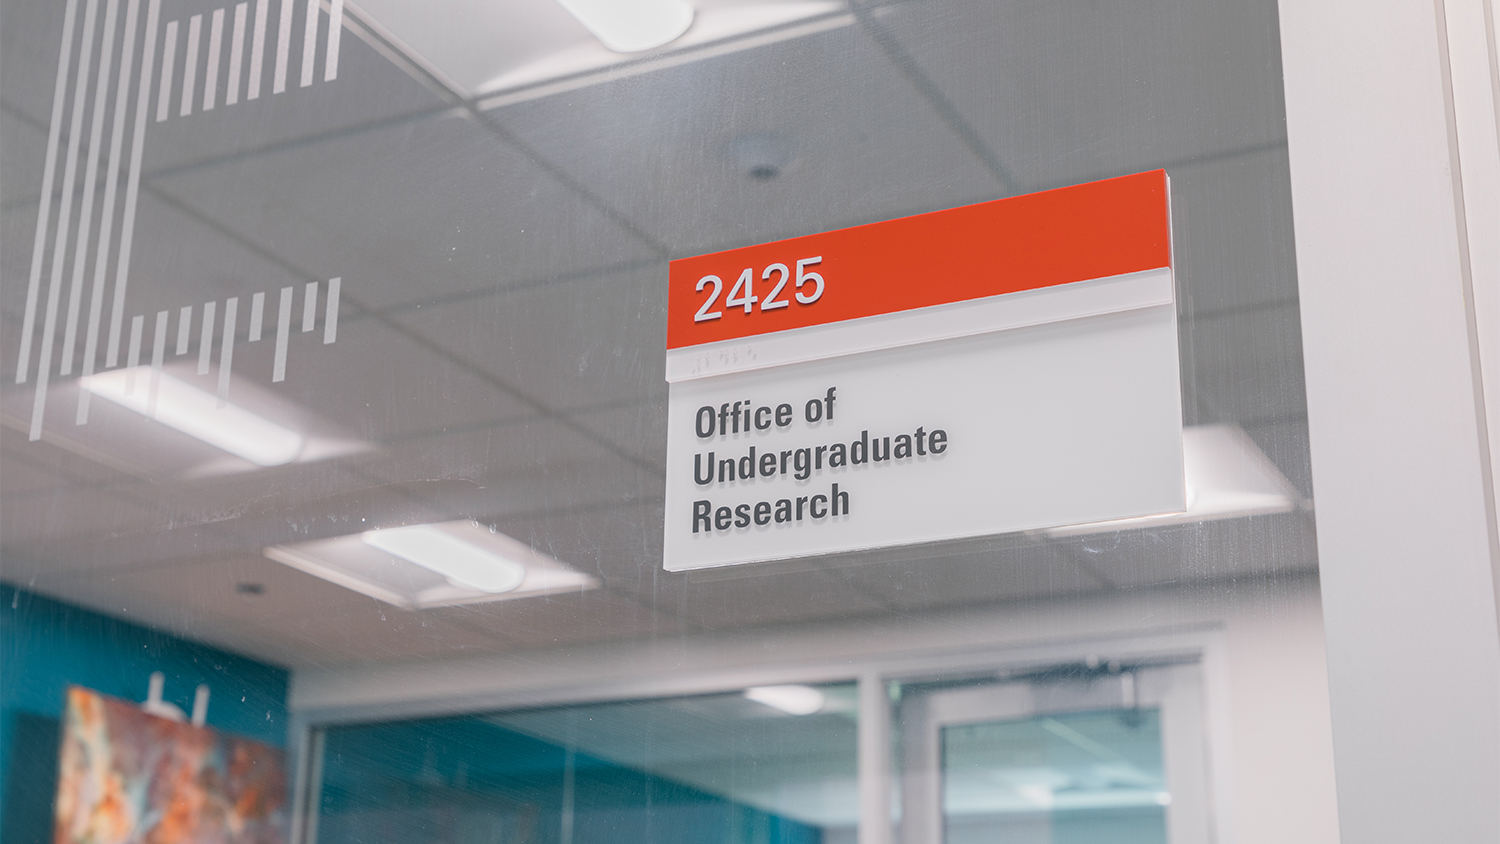 Sign for the Office of Undergraduate Research